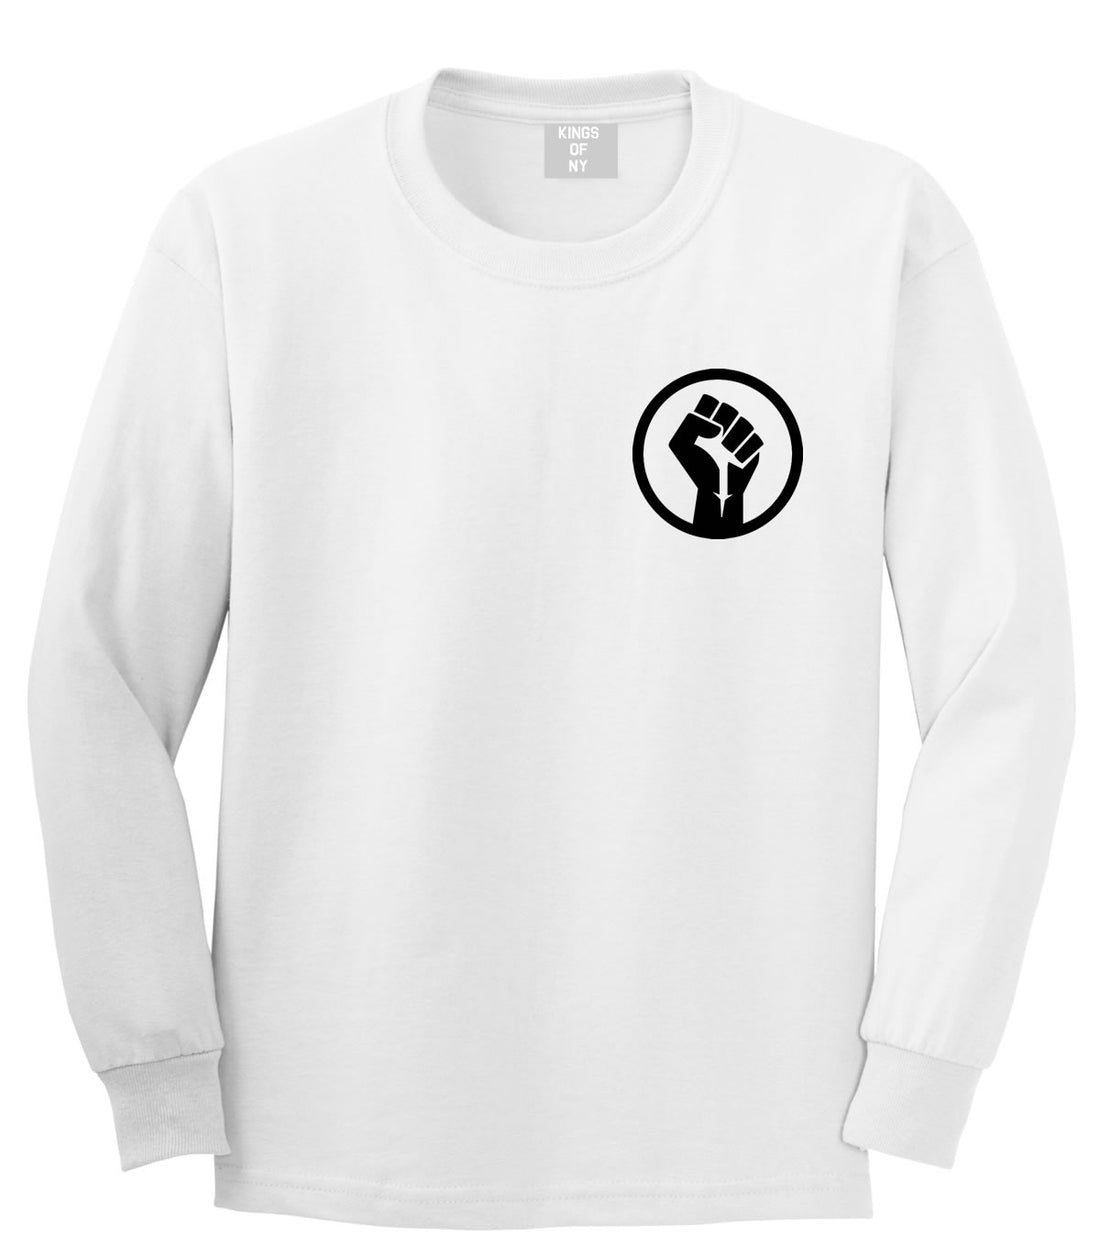 Black Power Fist Long Sleeve T-Shirt by Kings Of NY